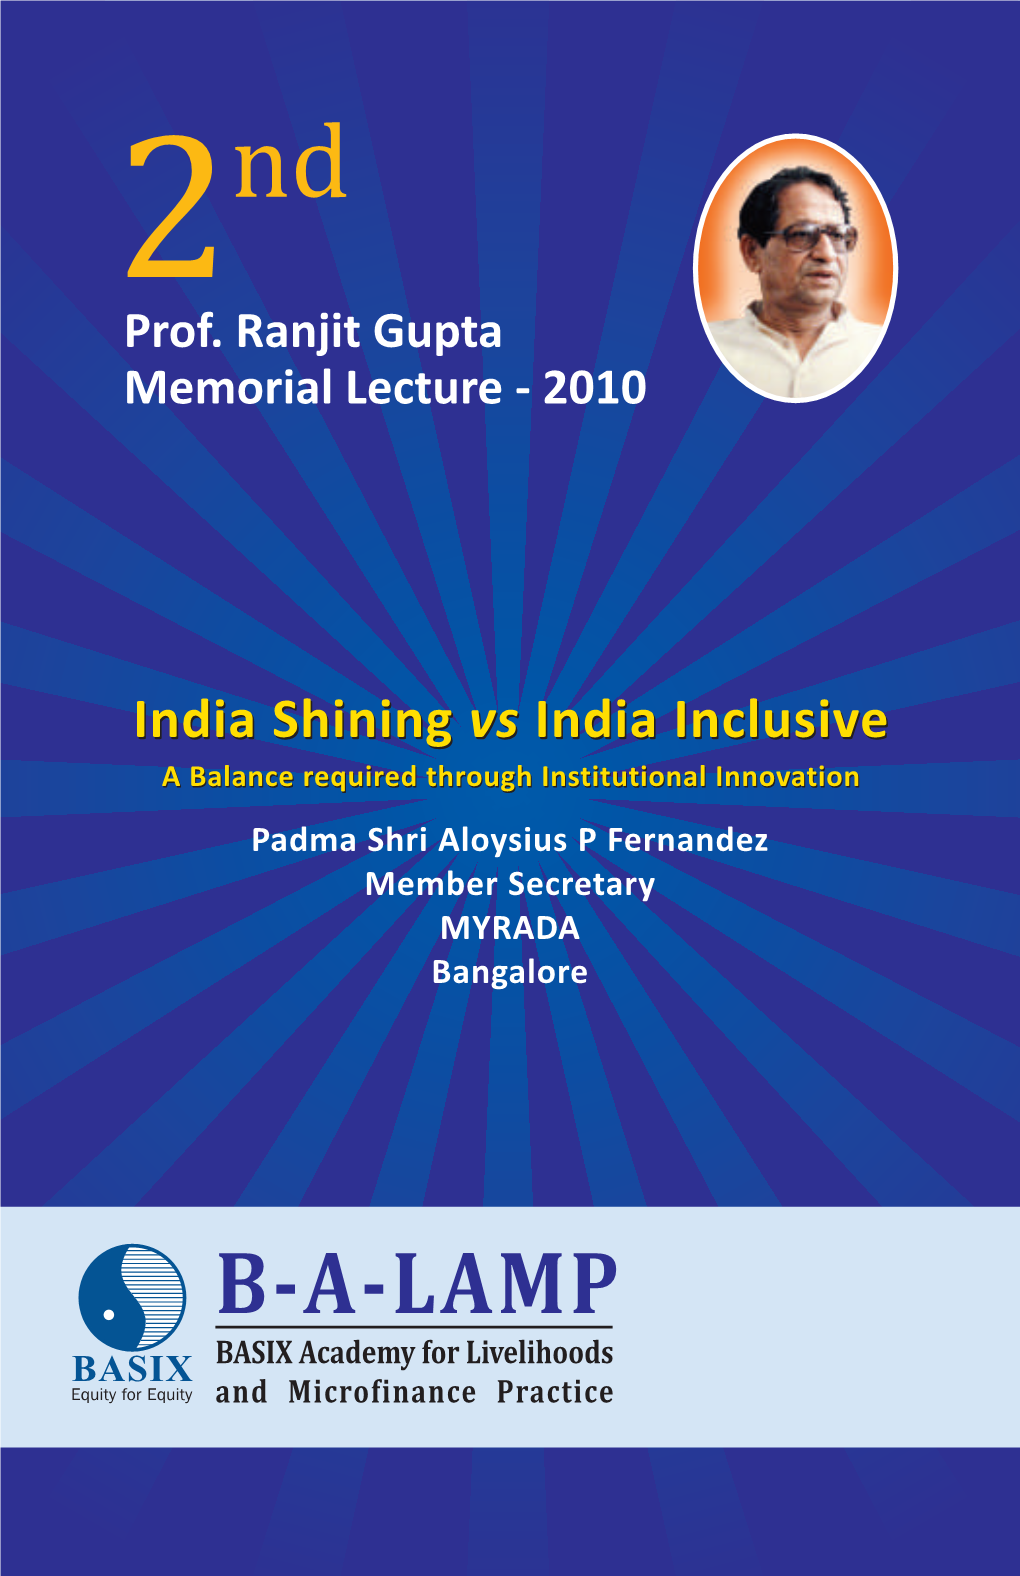 B-A-LAMP BASIX Academy for Livelihoods and Microfinance Practice About Late Professor Ranjit Gupta Born in 1934, Prof